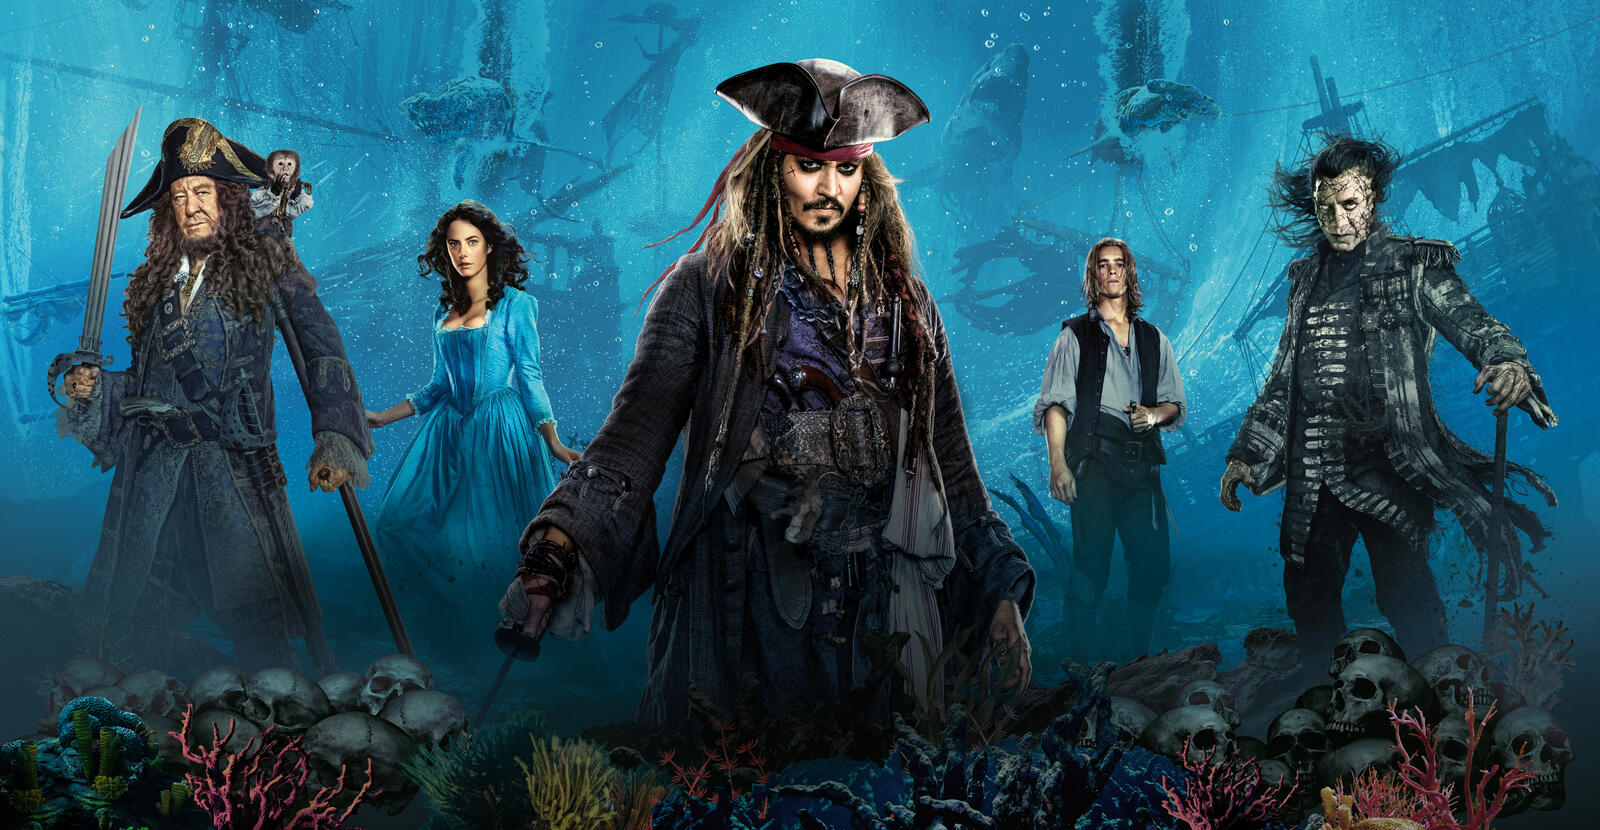 Wallpapers Pirates of the Caribbean: Dead men tell no tales adventure banner on the desktop